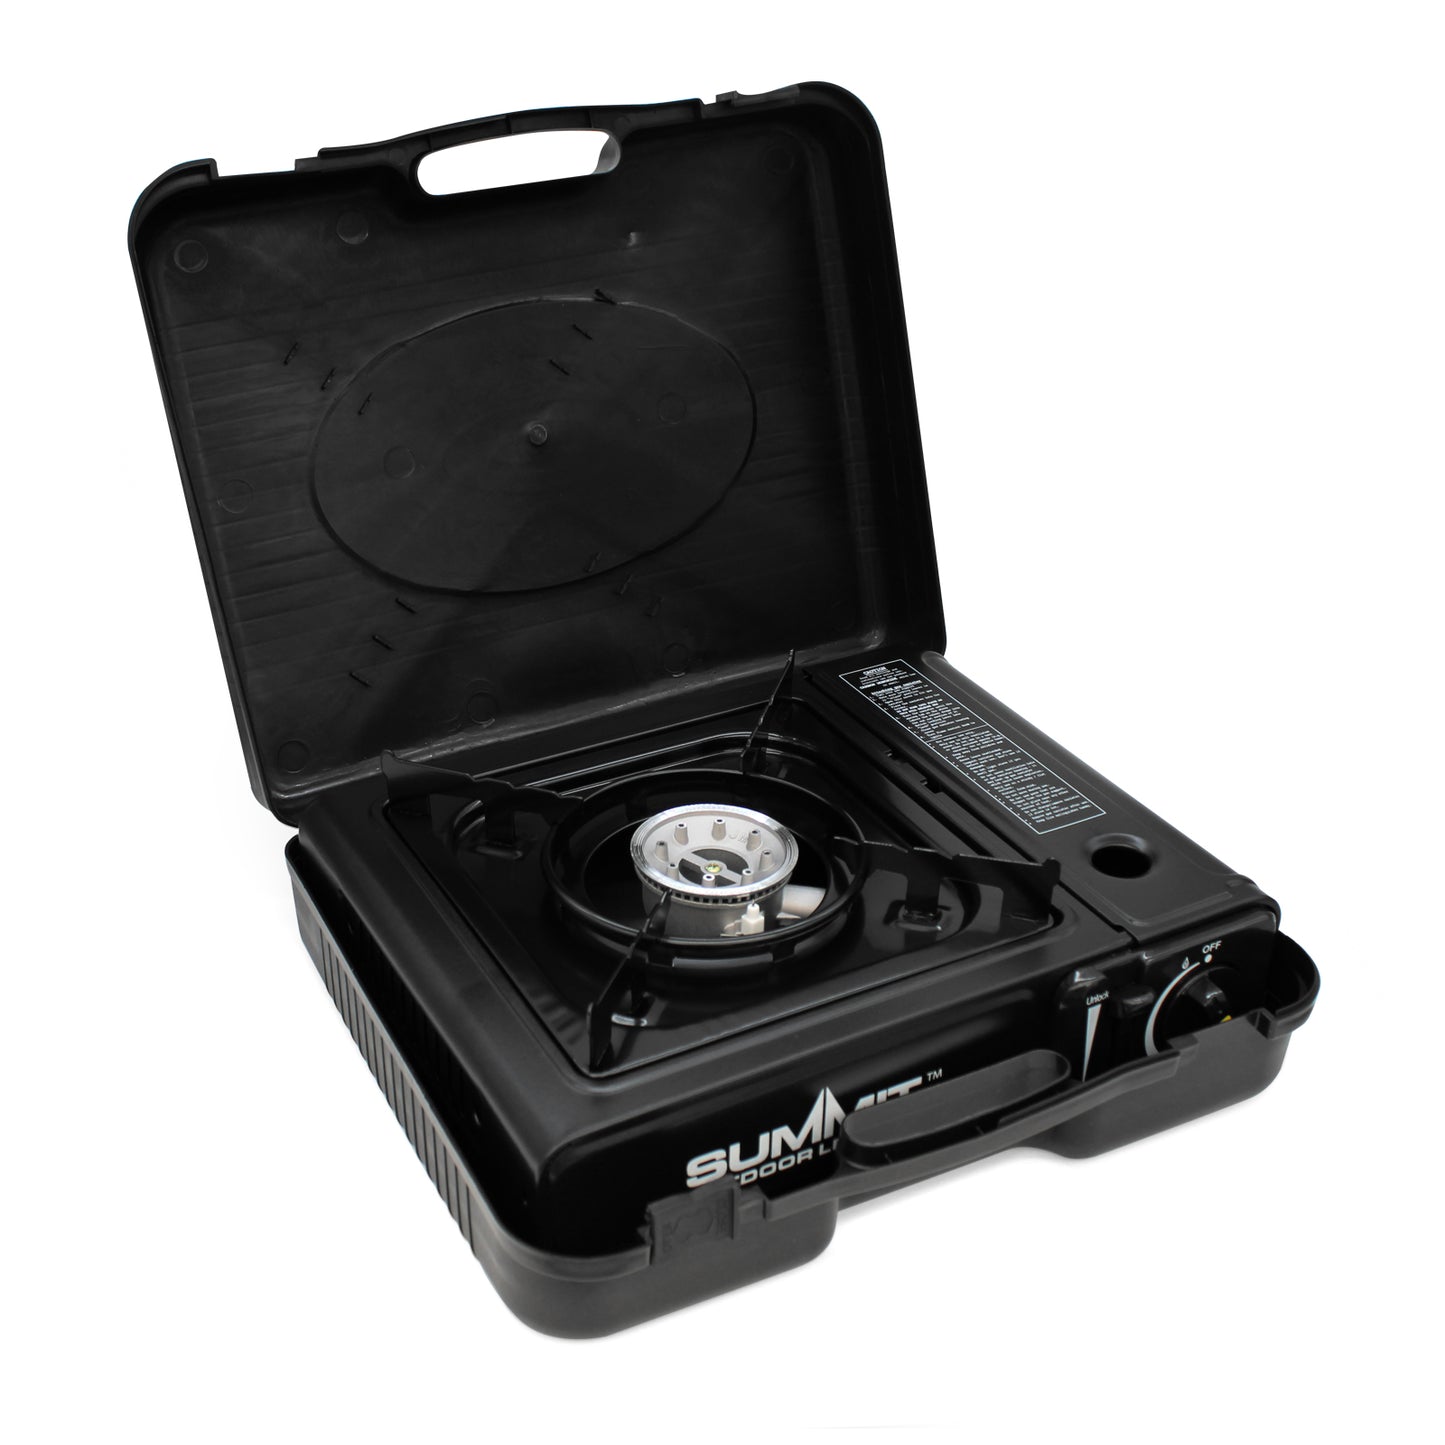 Portable Gas Cooker with Carry Case